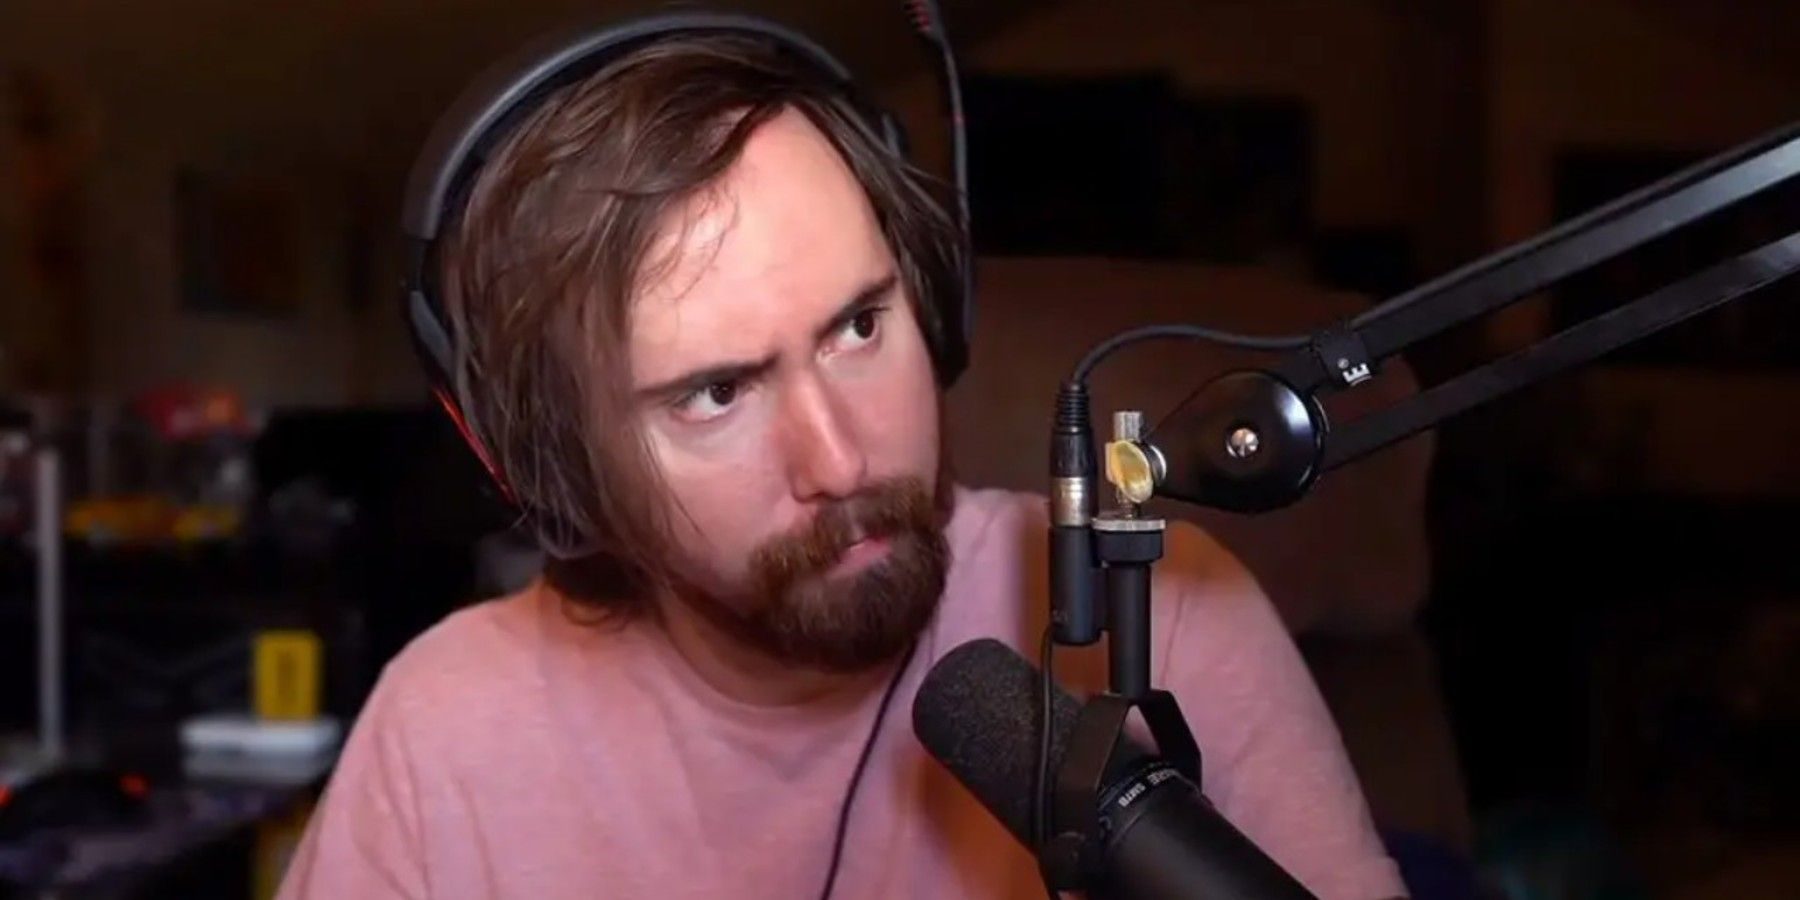 streamer-asmongold-doesnt-think-day-off-twitch-movement-will-work-4877971